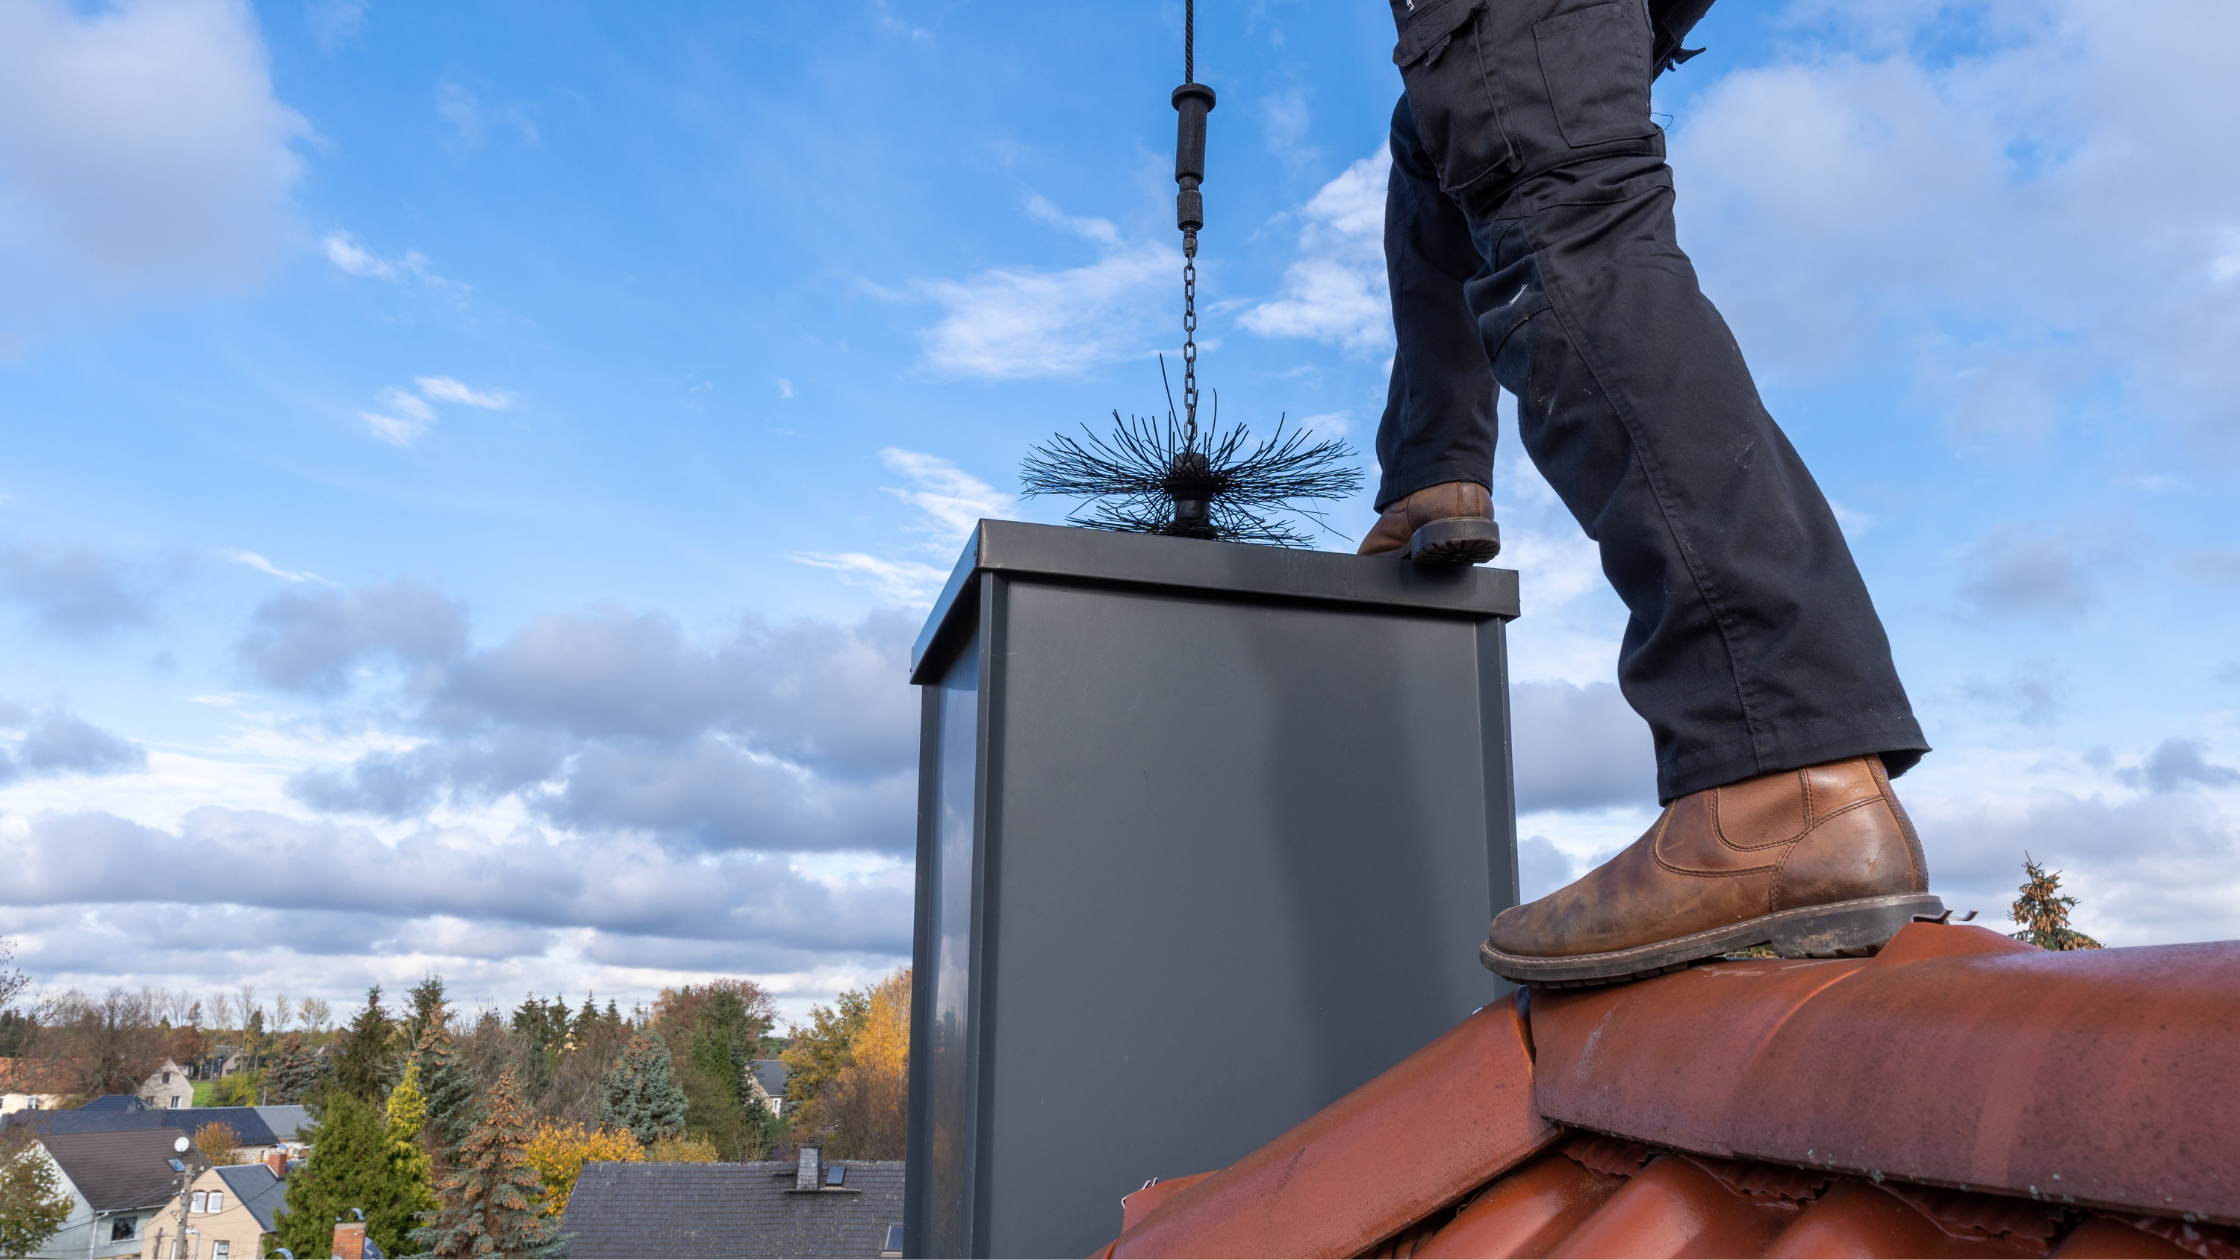 Chimney Maintenance 101: Don't Let Your Chimney Become a Fire Hazard